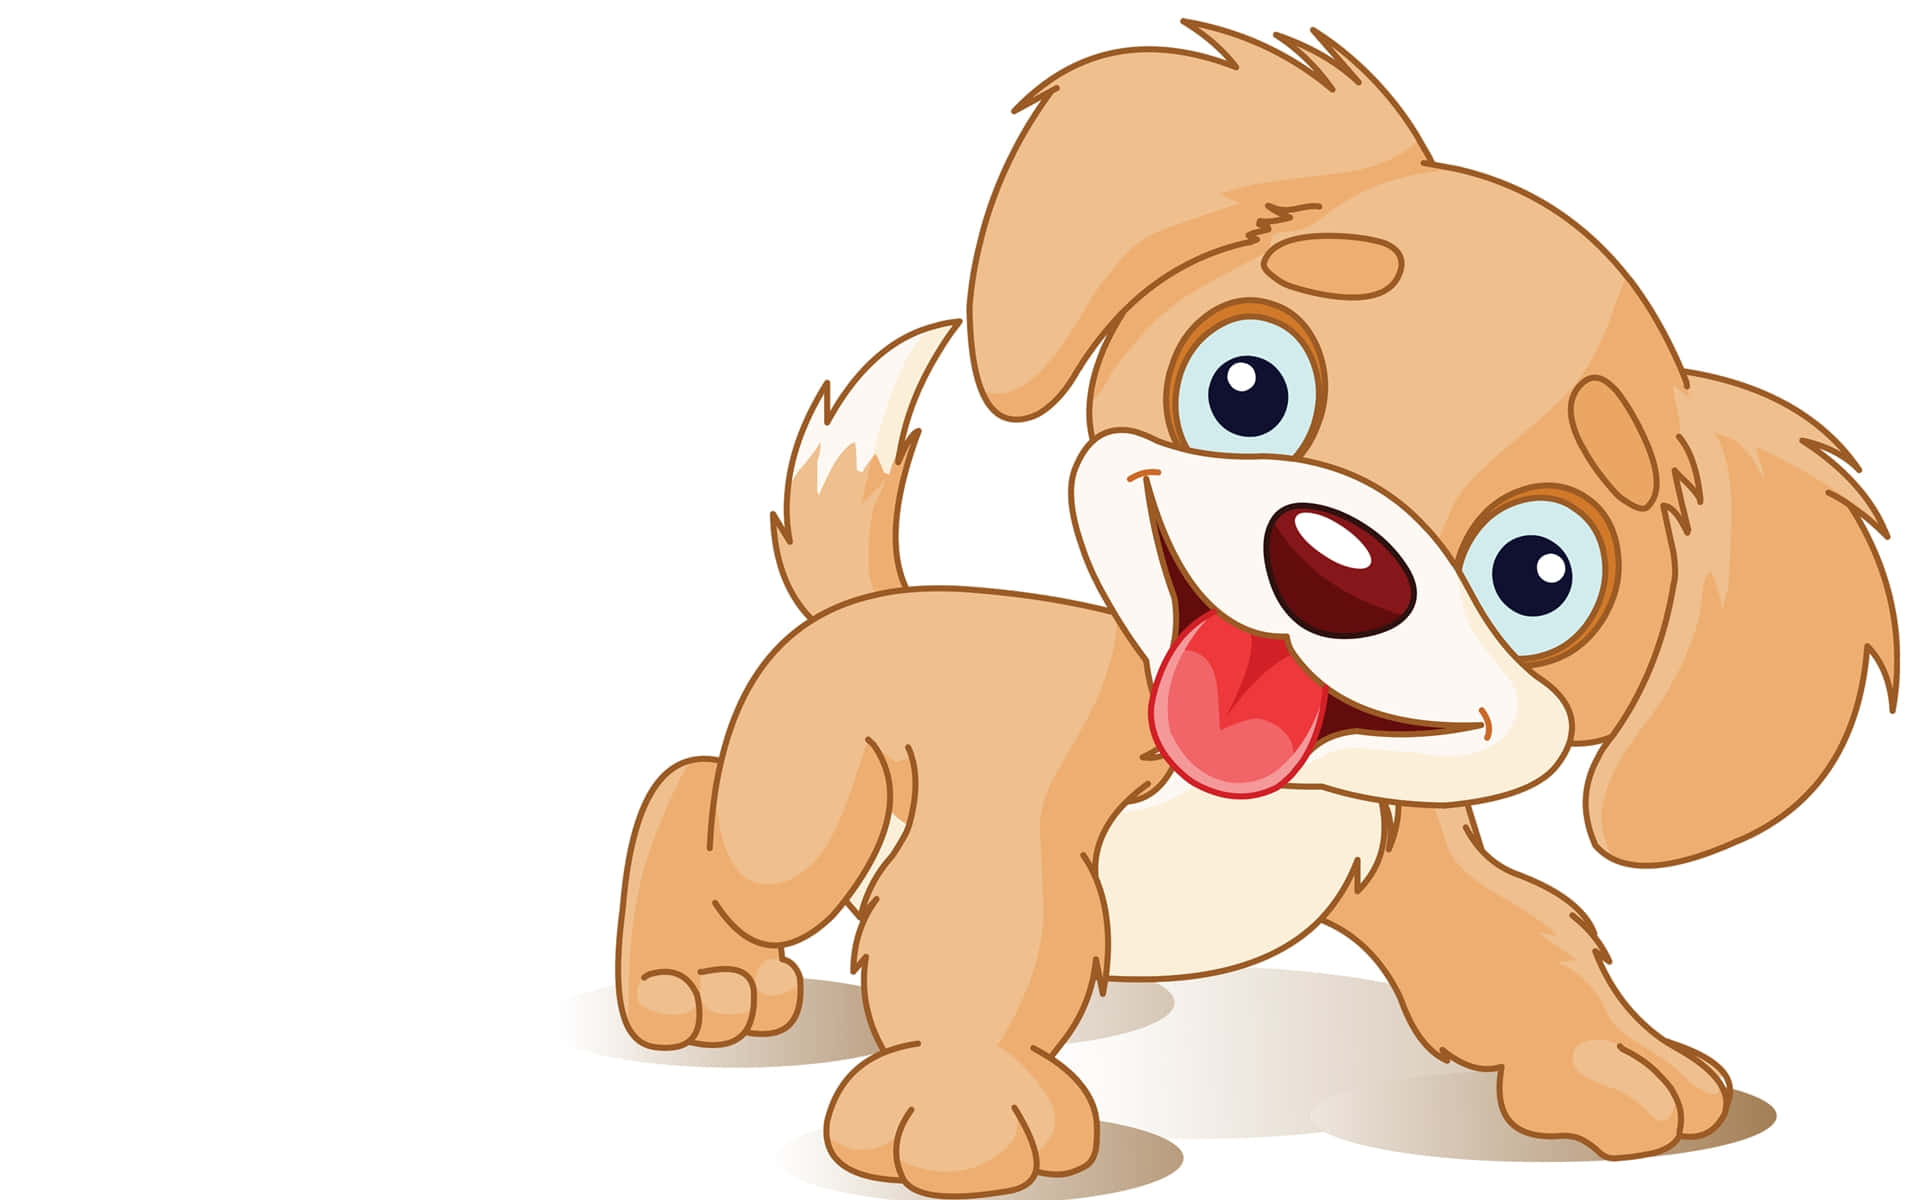 A Cartoon Dog With A Tongue Sticking Out